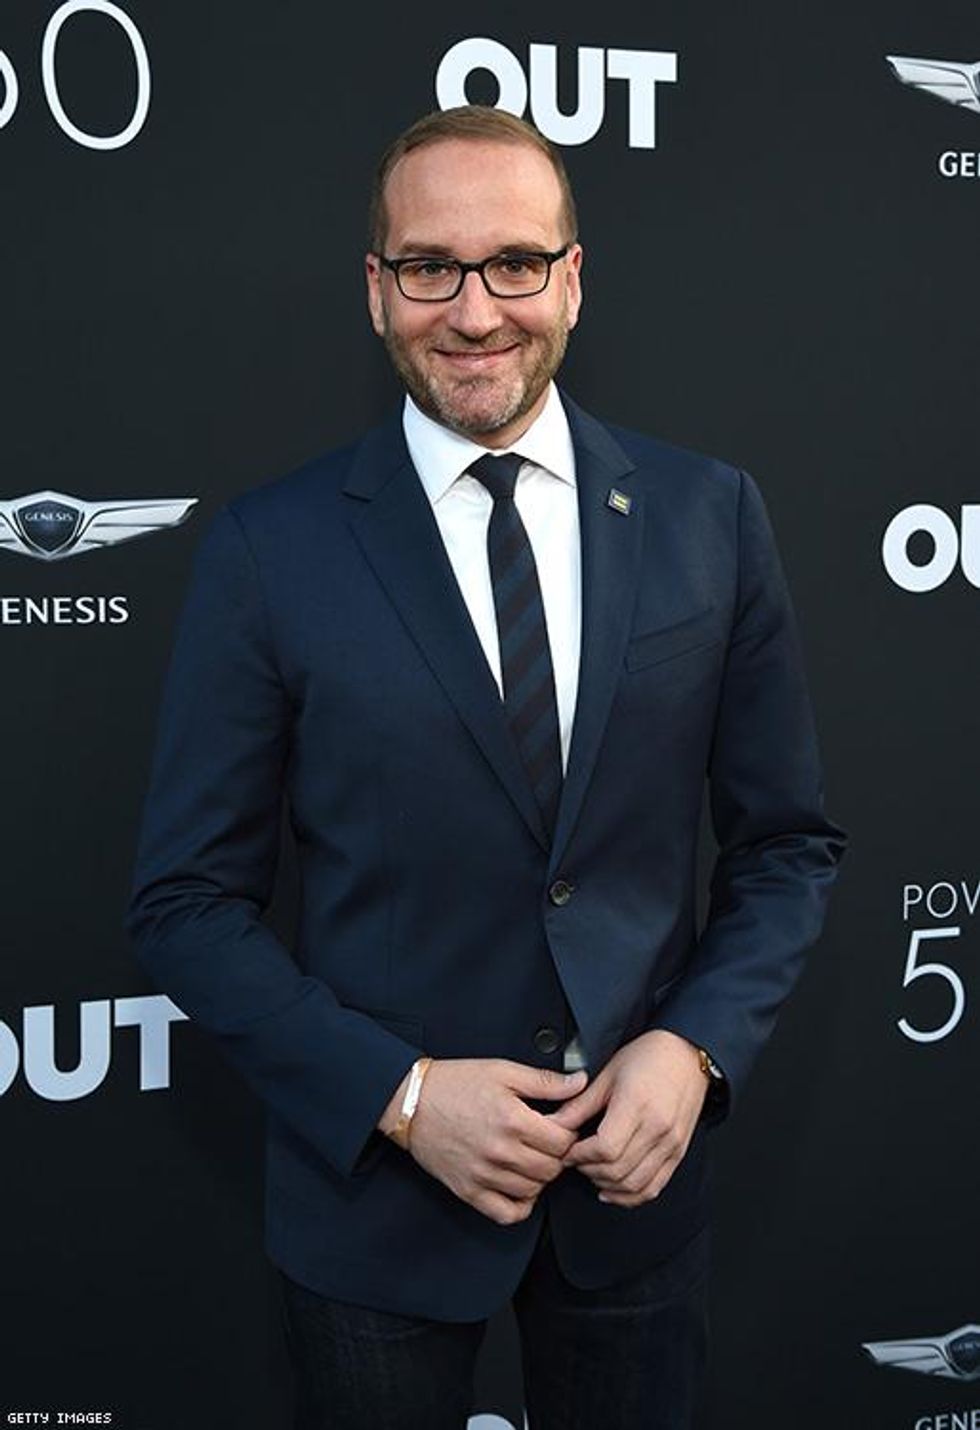 Power 50 Honoree Chad Griffin